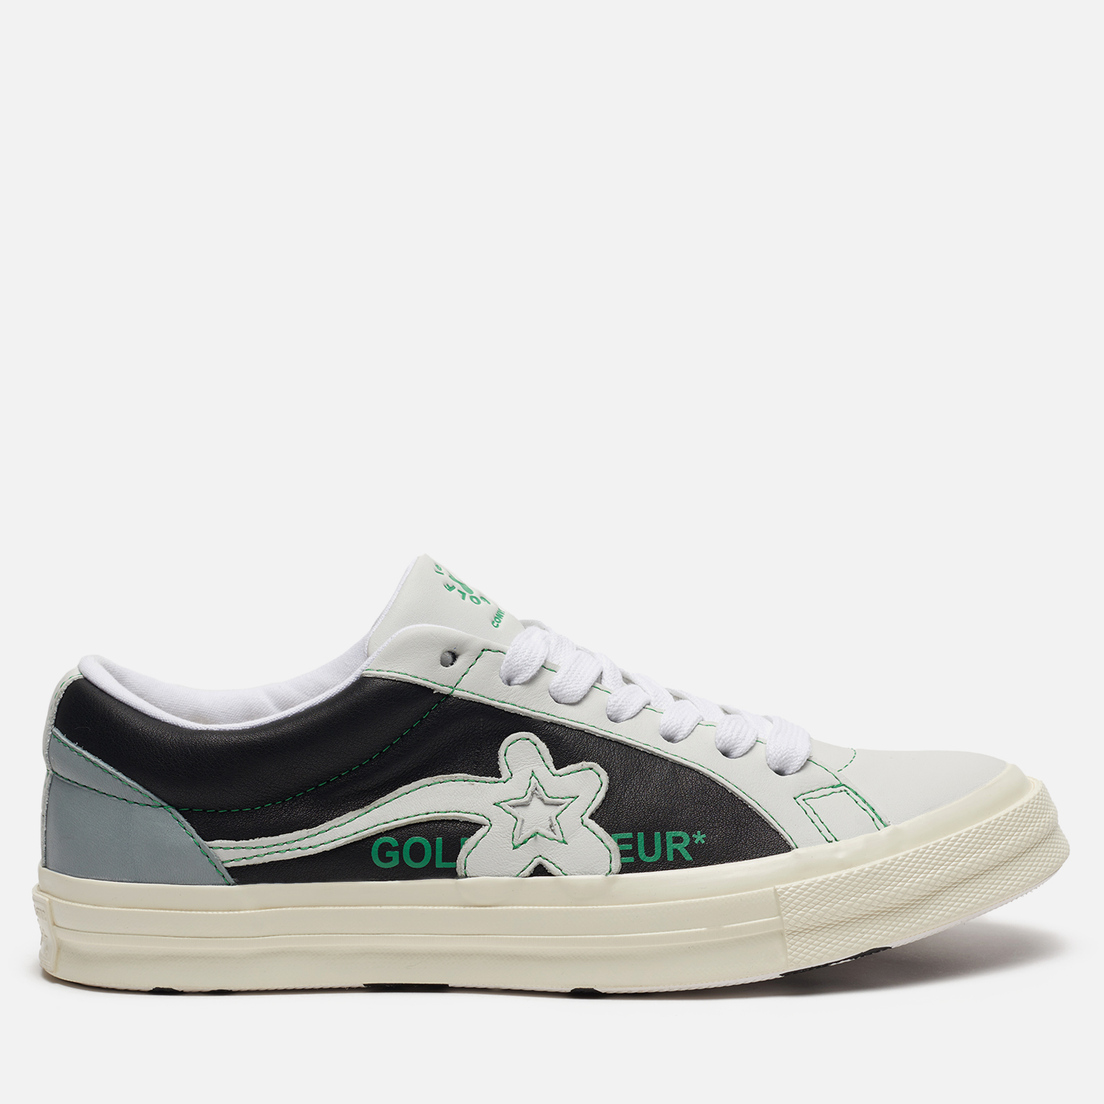 converse one star blue and green